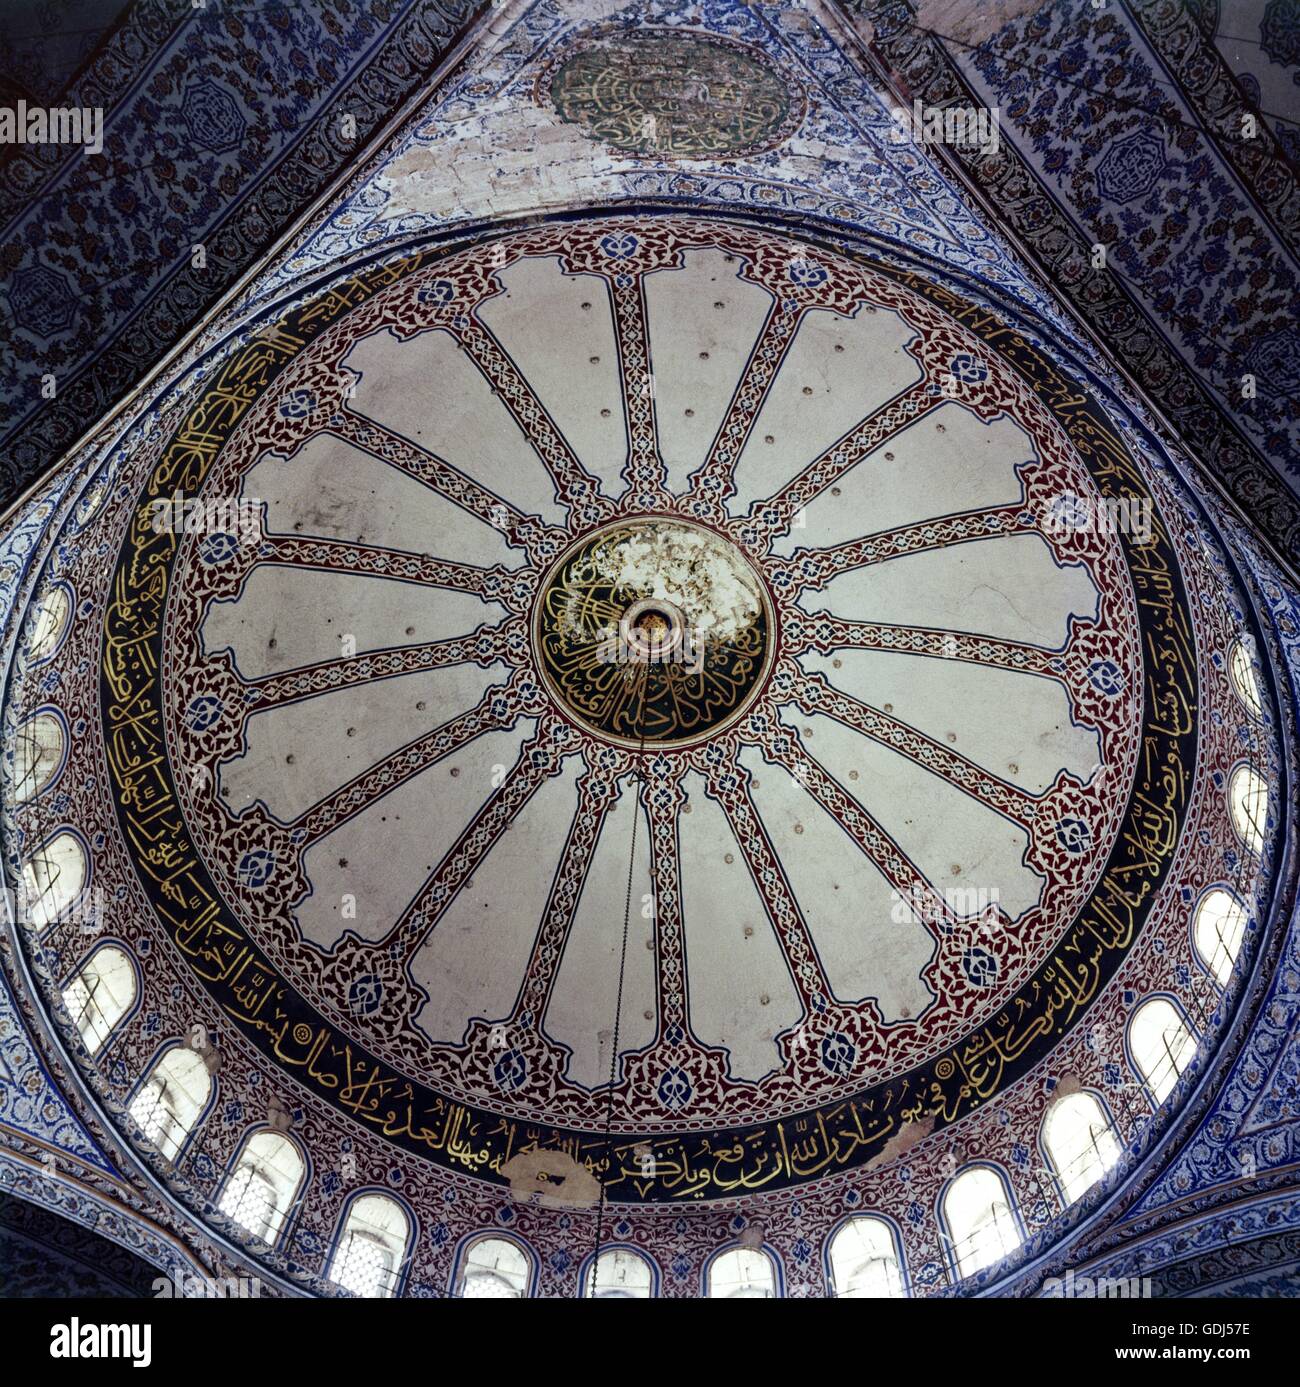 geography/travel, Turkey, Istanbul, buildings, Sultan Ahmed Mosque, interior view, main dome, built by Mehmet Aga, 1609 - 1616, Stock Photo